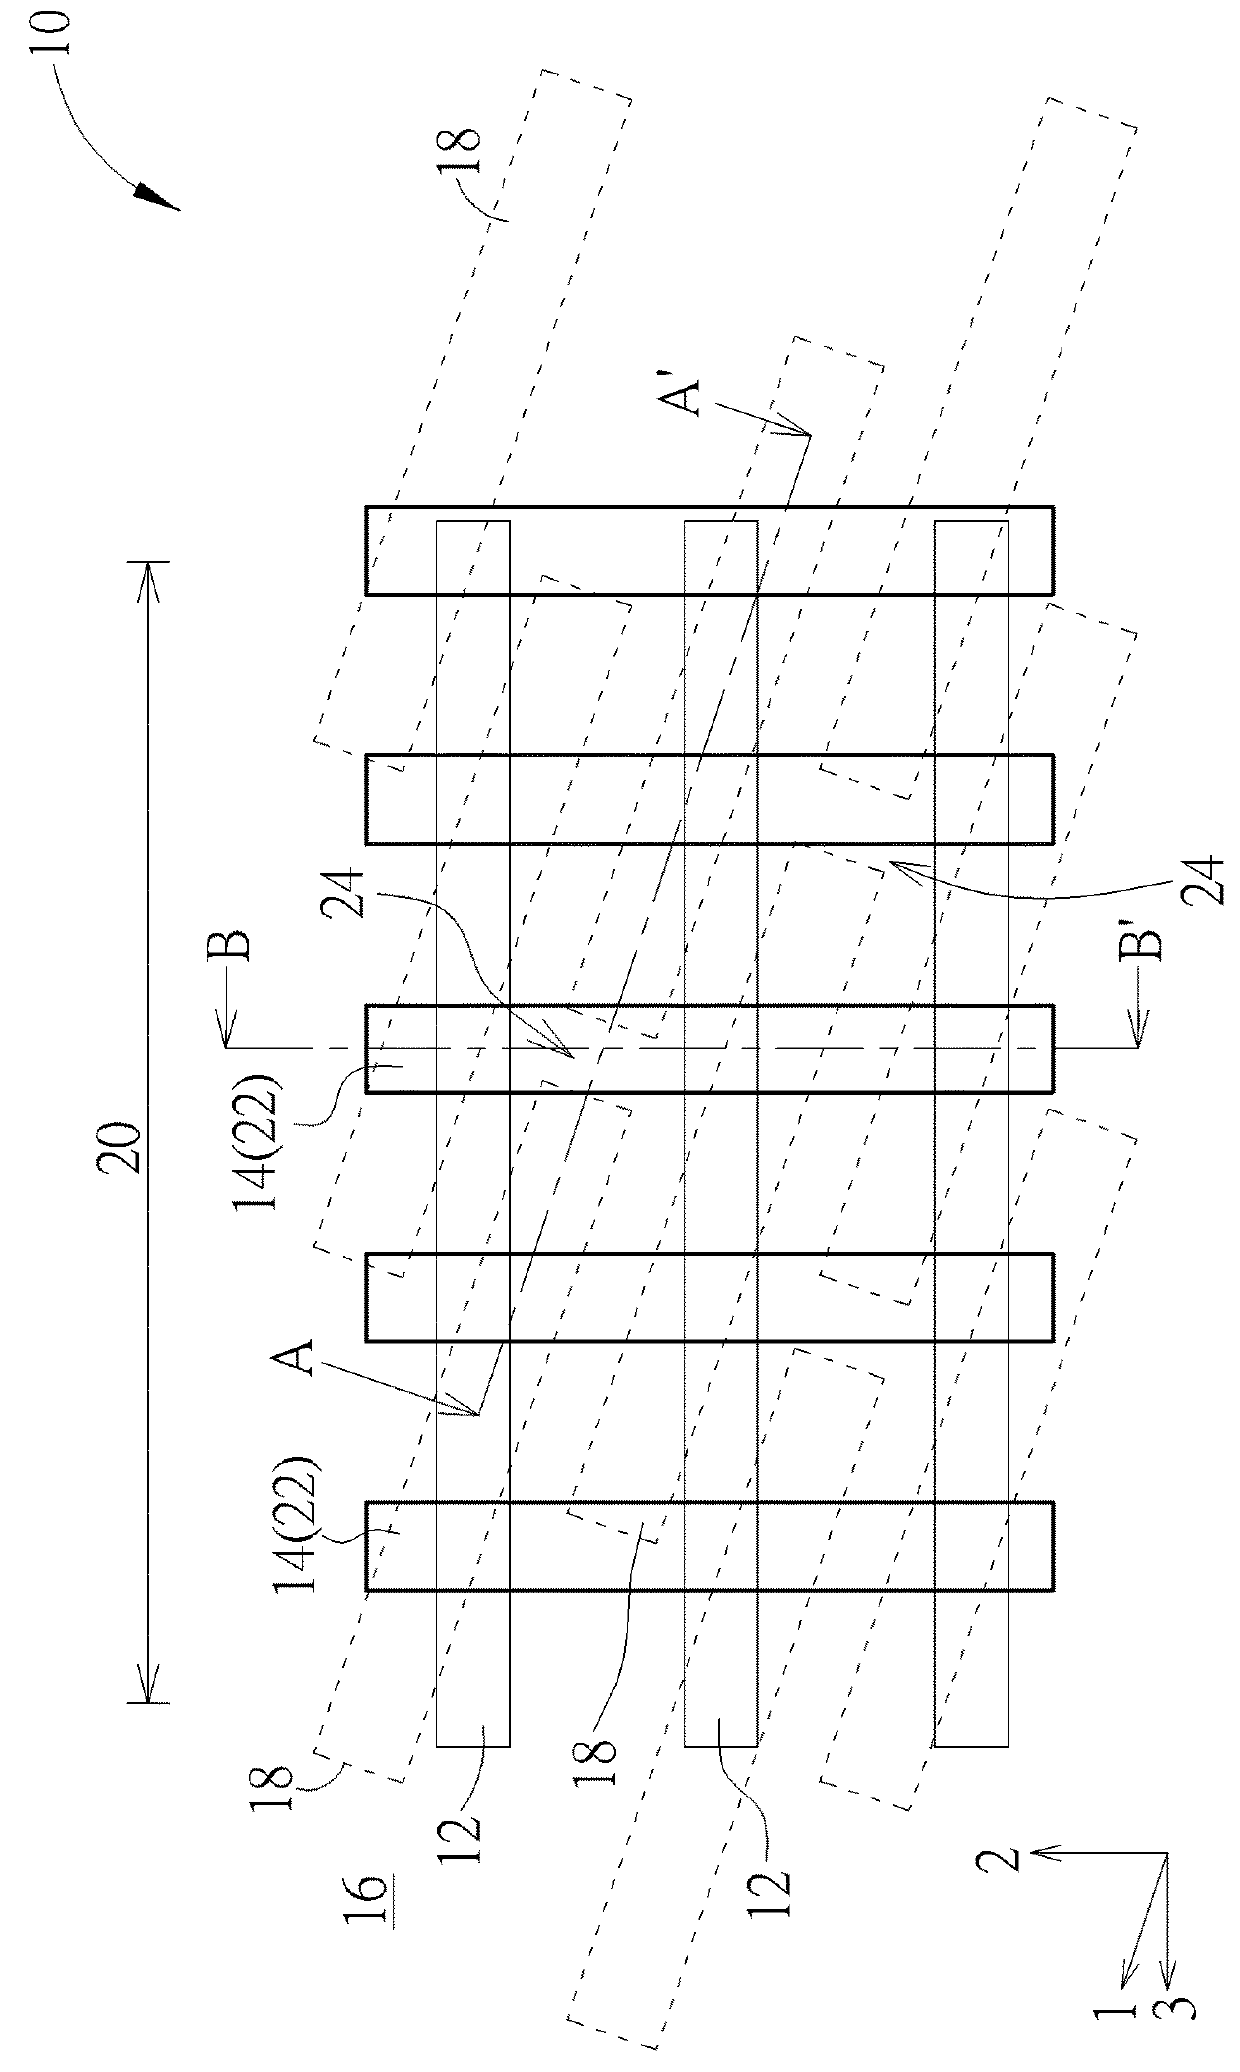 Semiconductor structure for preventing row hammering issue in DRAM cell and method for manufacturing the same